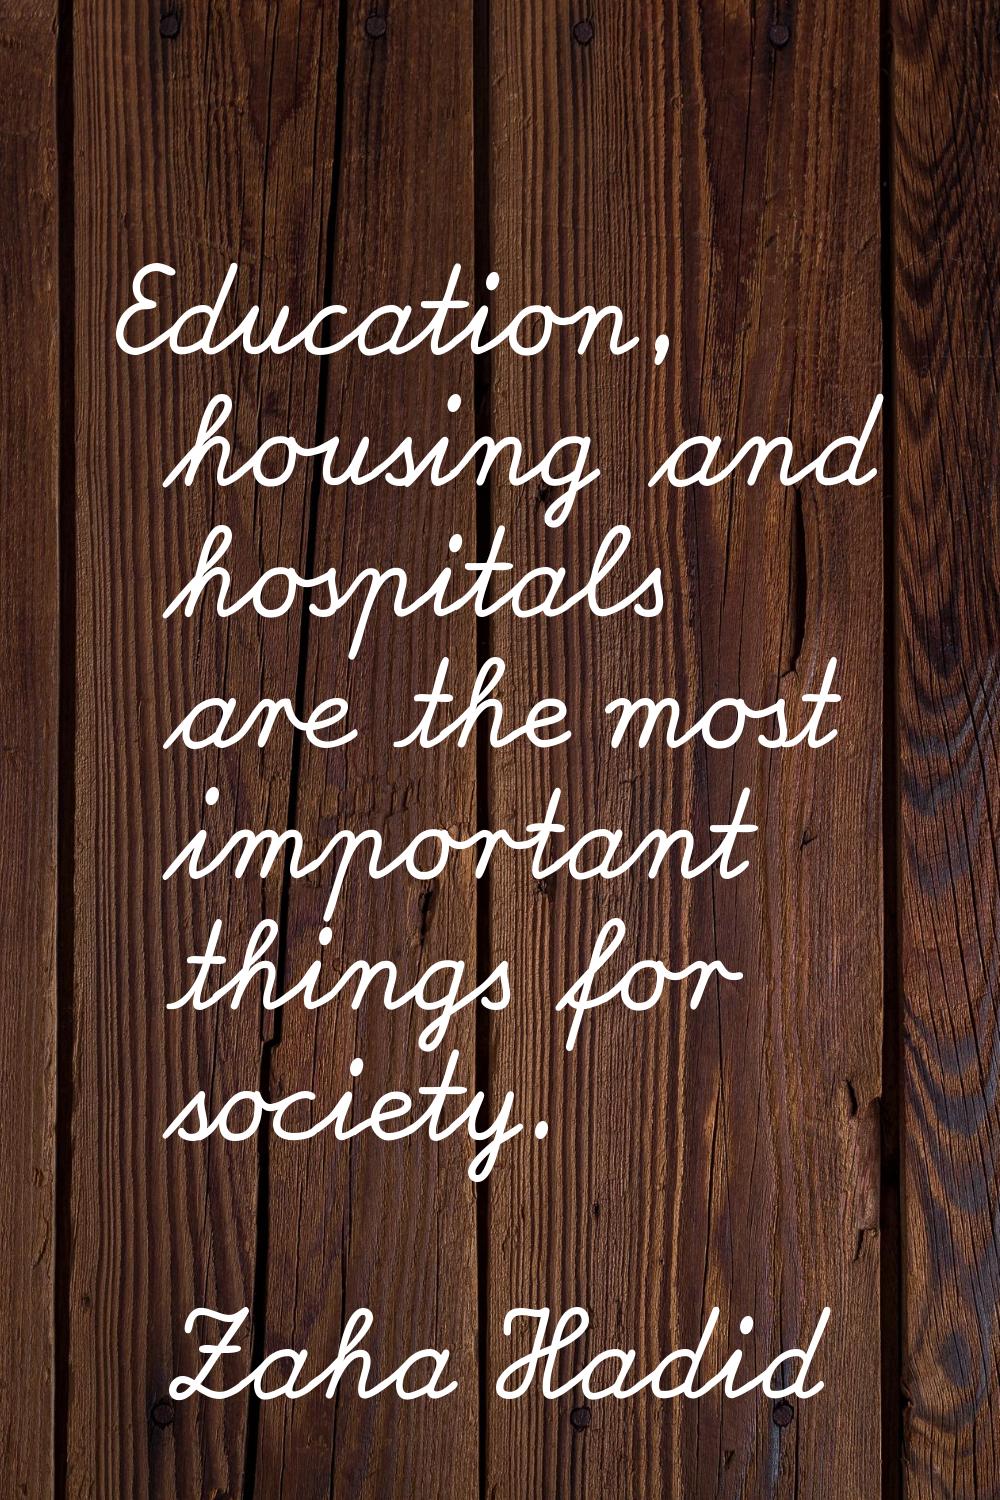 Education, housing and hospitals are the most important things for society.